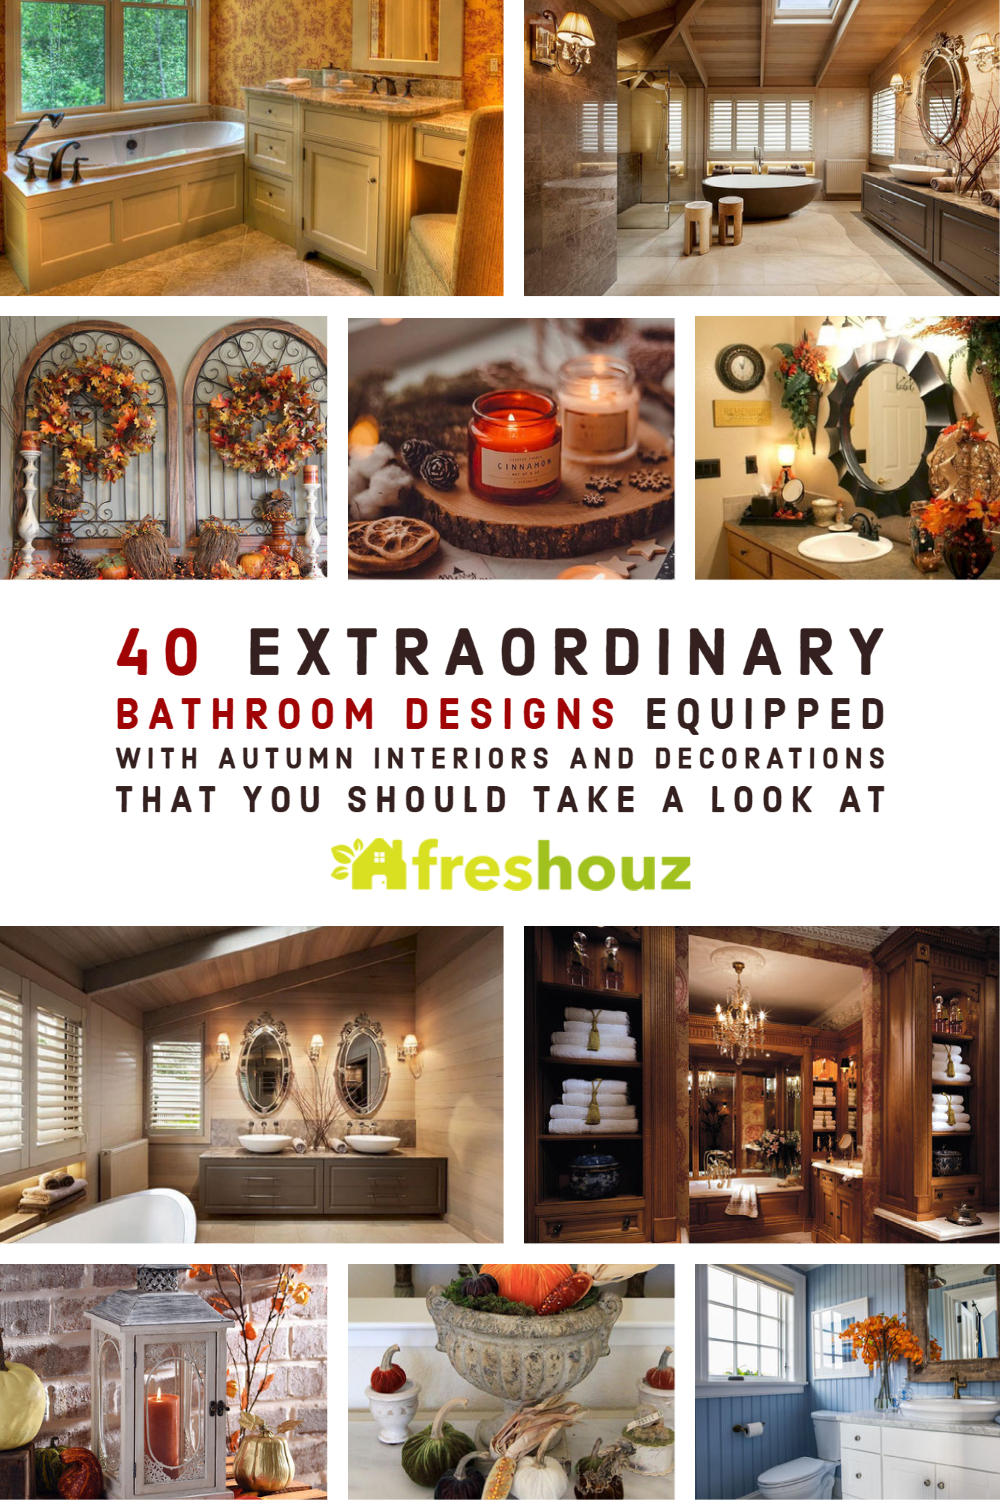 40 Extraordinary Bathroom Designs Equipped With Autumn Interiors (1)